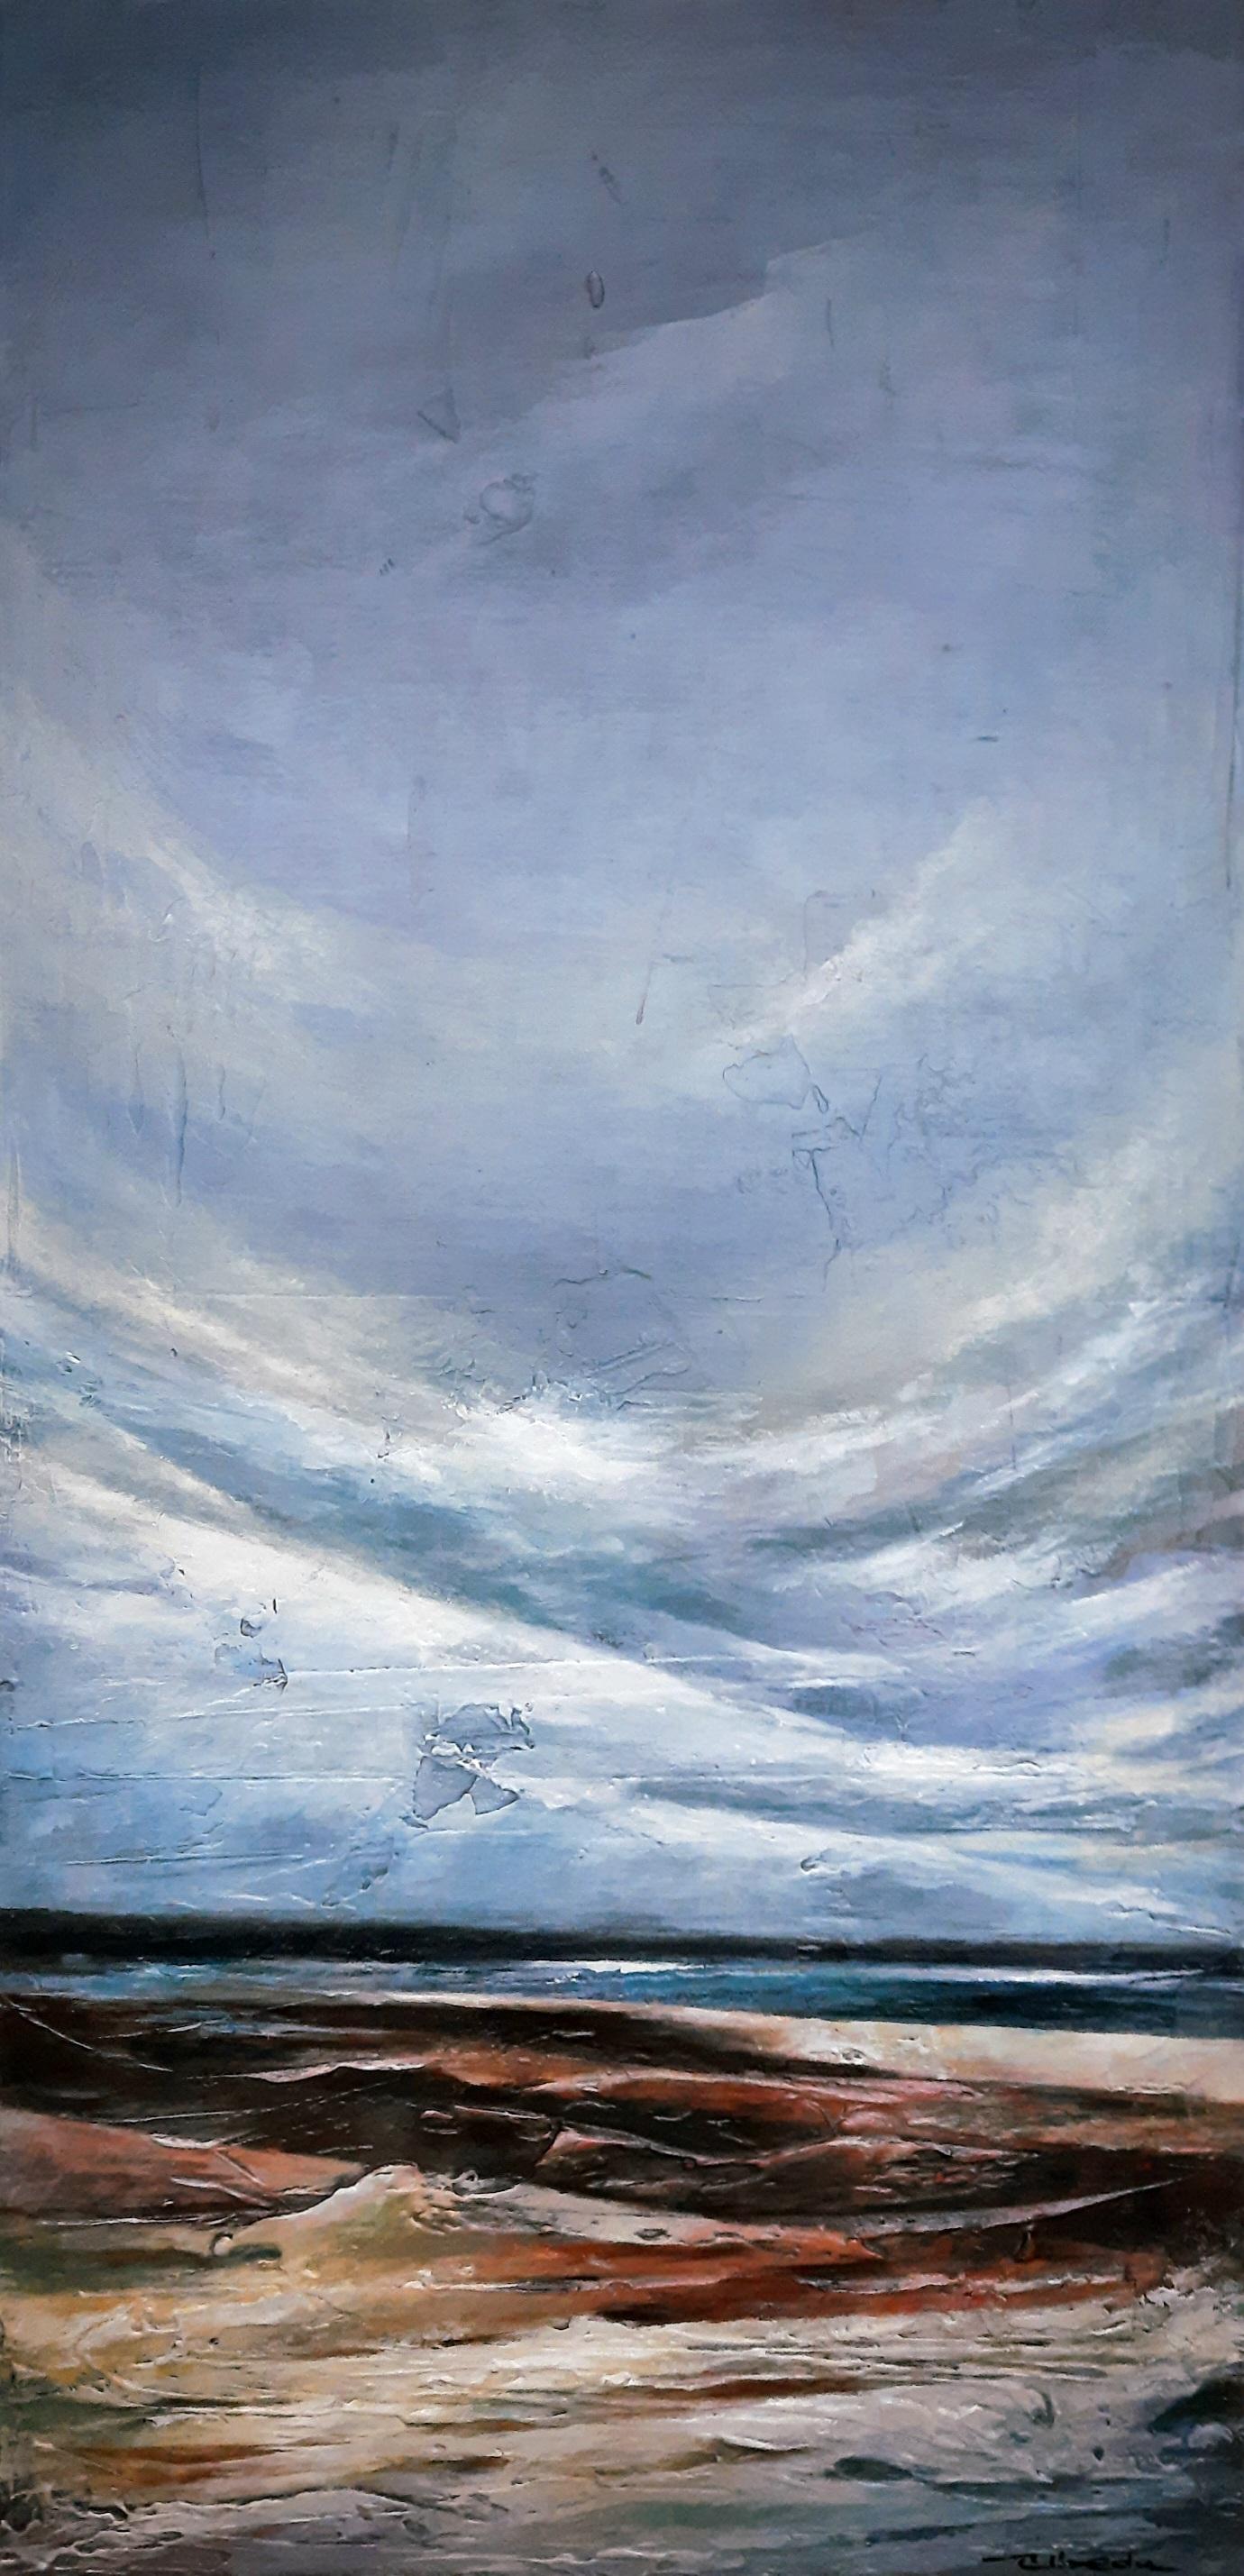 Sea of clouds. Abstract impressionist vertical landscape. Blue-grey-ocher color - Painting by Ángel Luis Úbeda